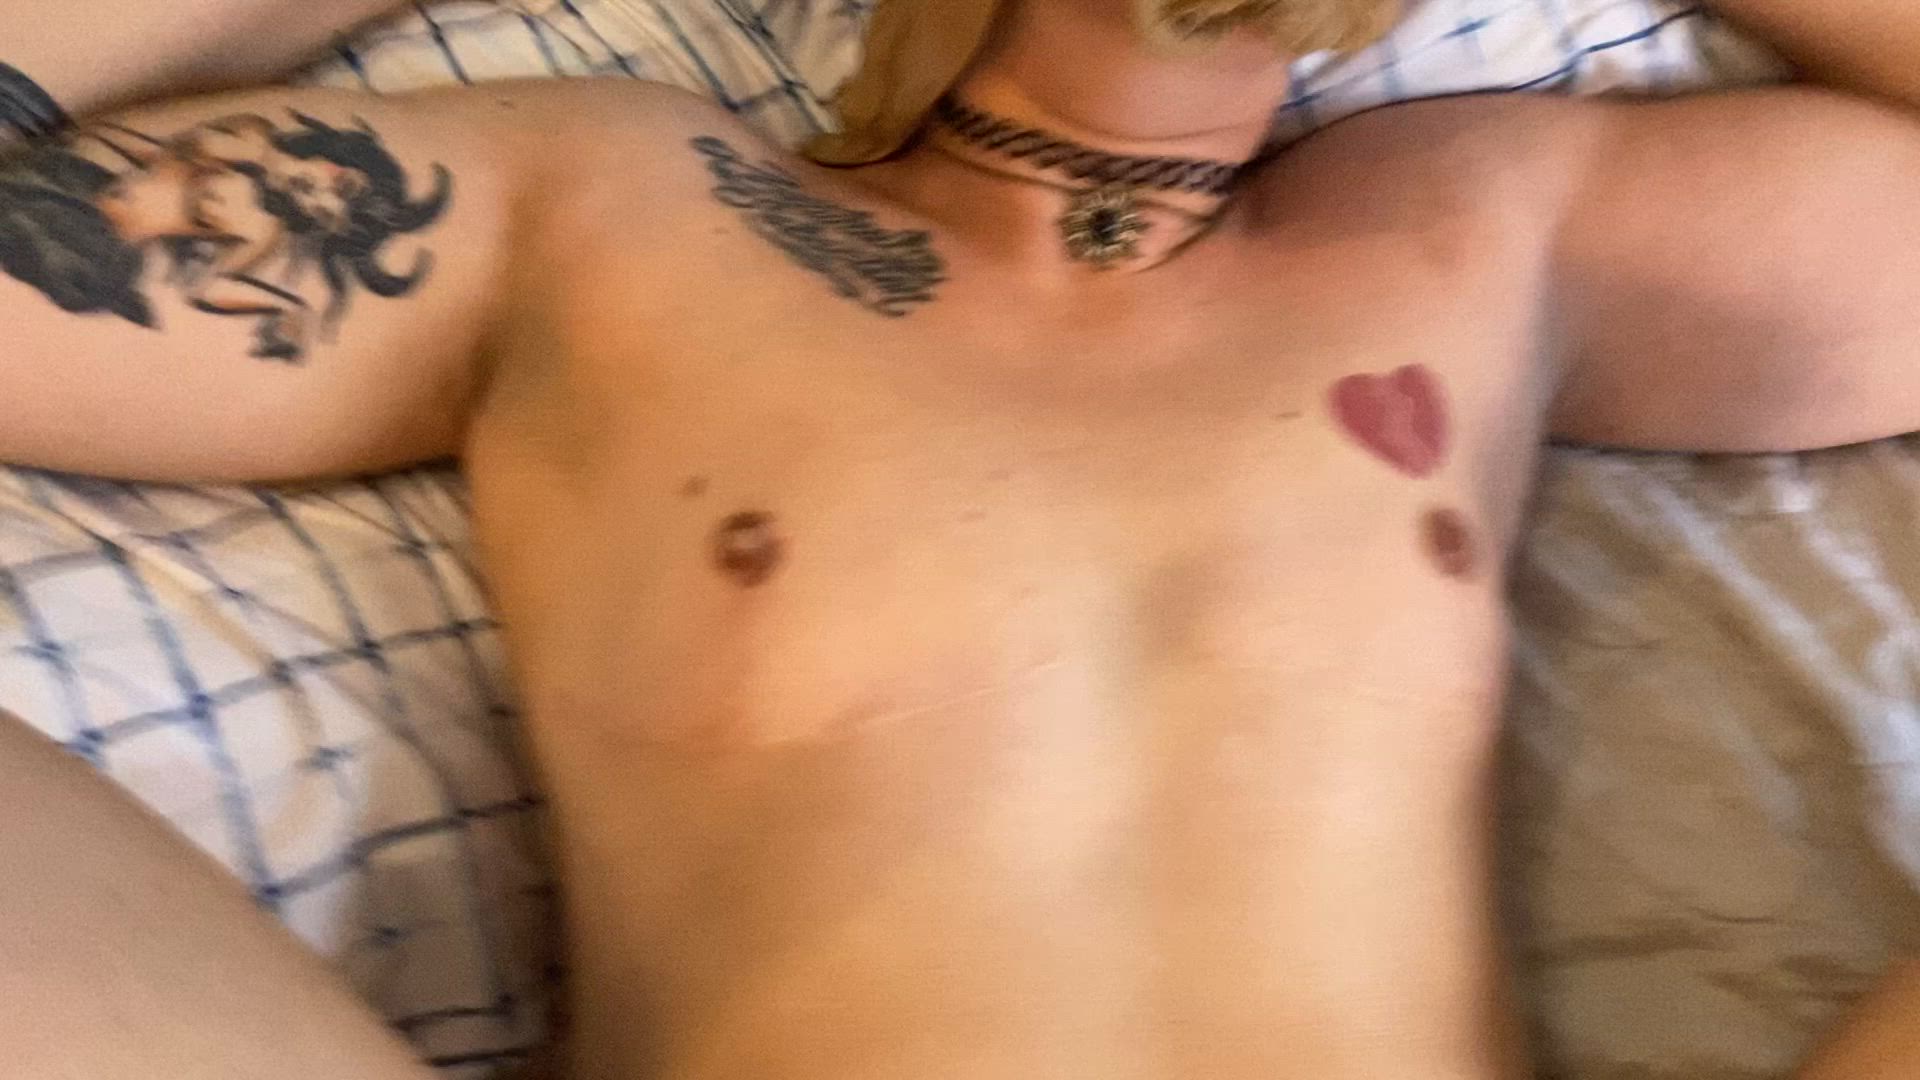 Amateur porn video with onlyfans model flowerbottom <strong>@yesterdayspanties</strong>